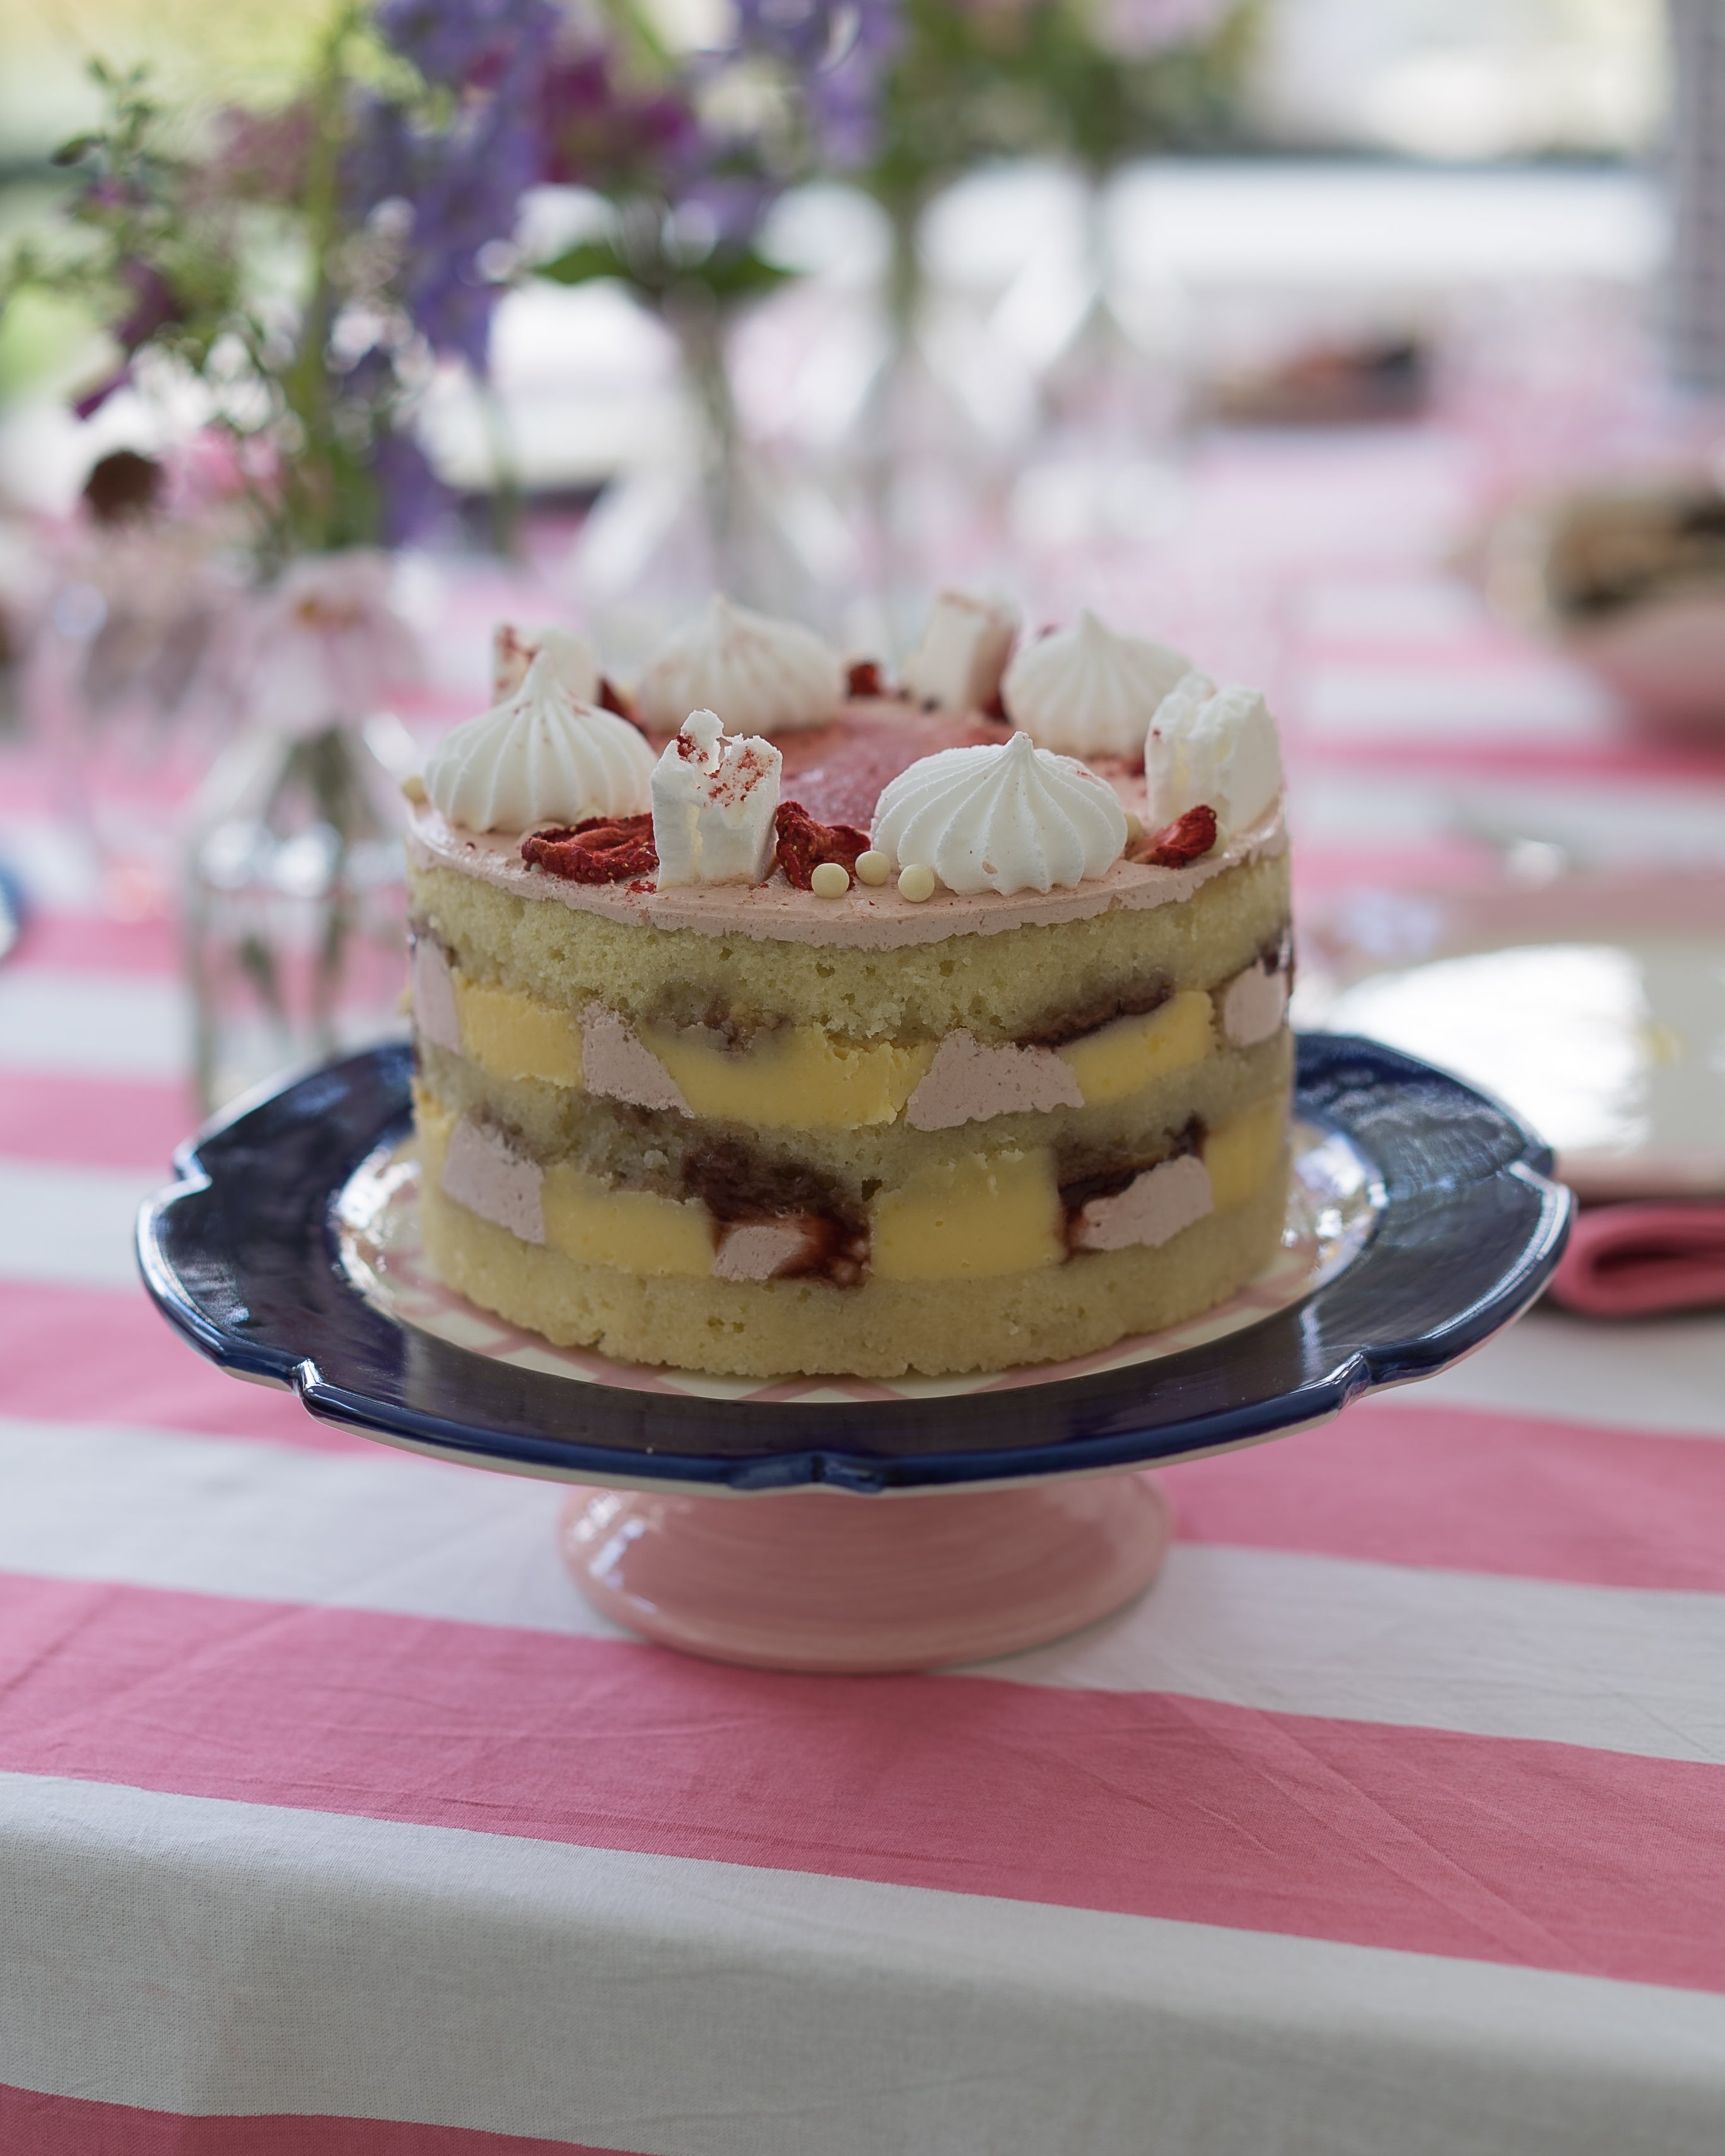 Cake Stand | Navy & Pink Gingham